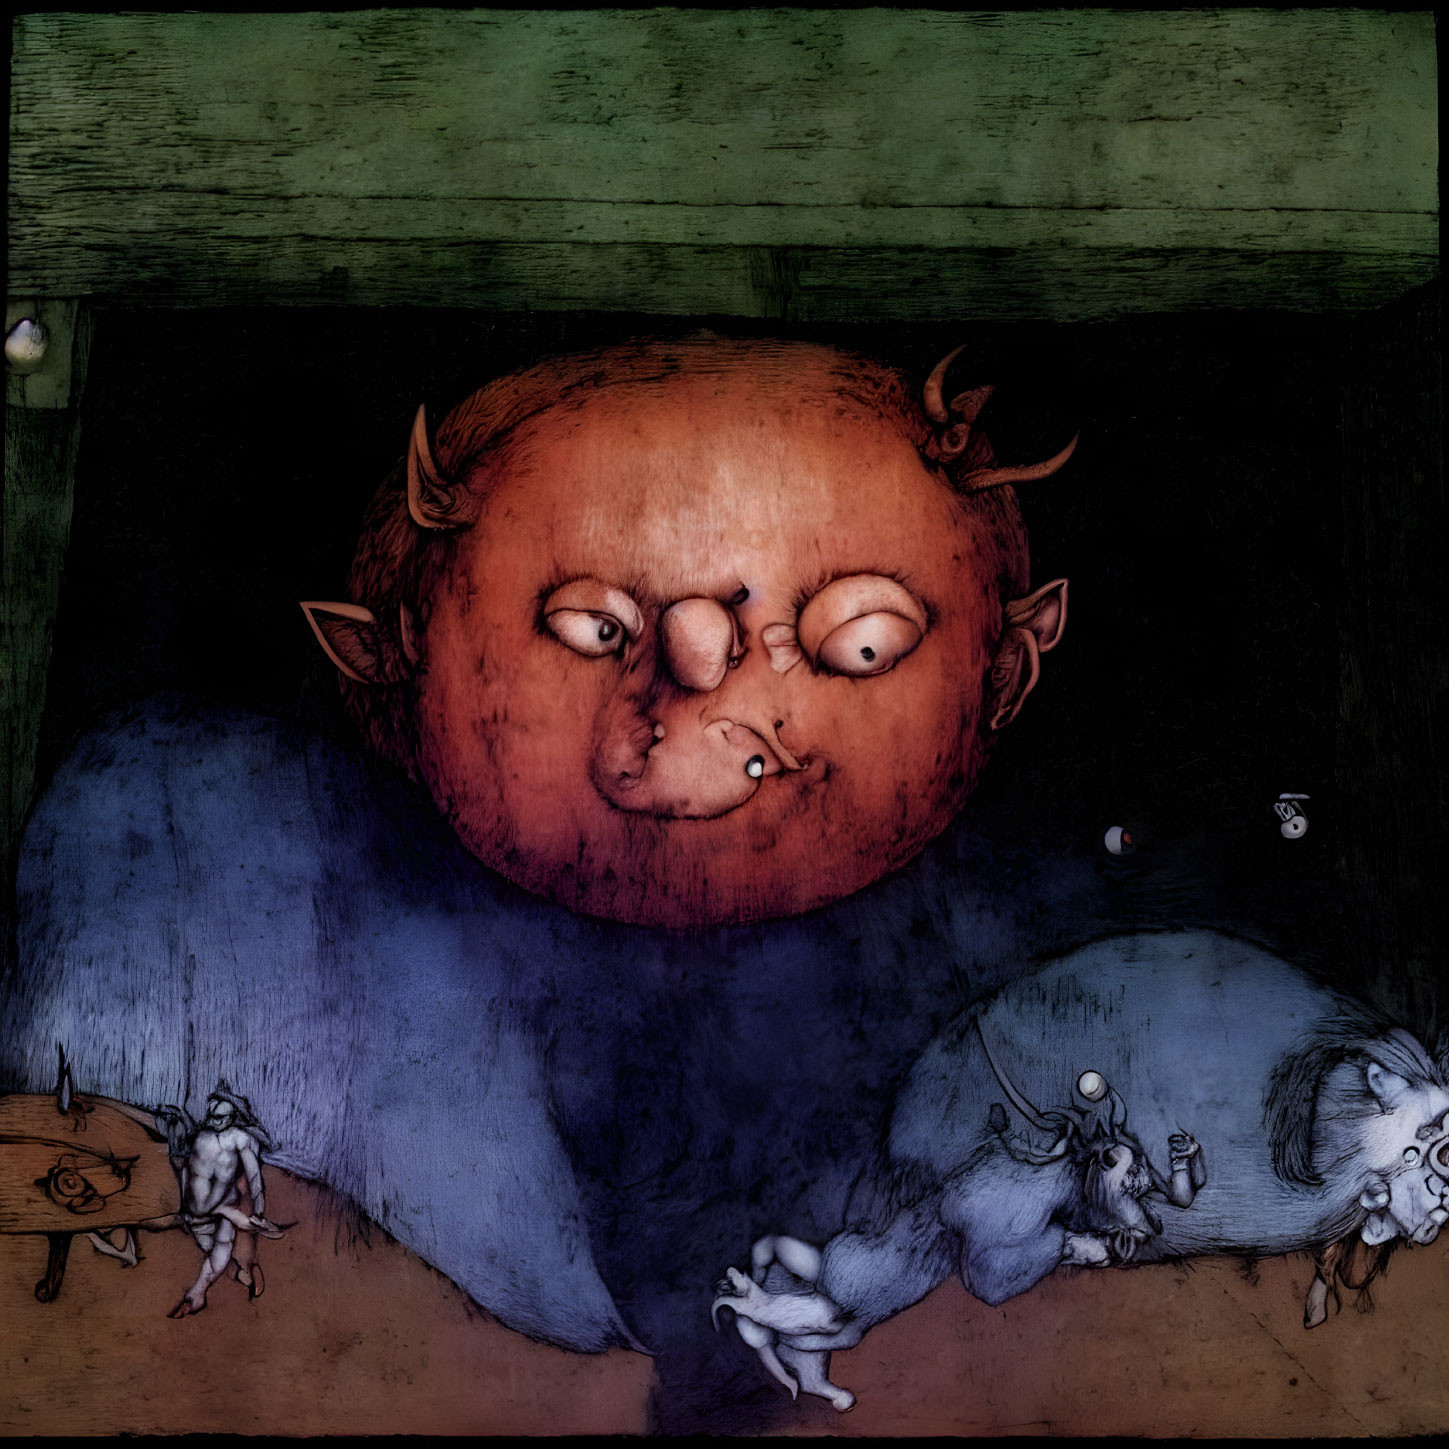 Surreal illustration of large orange face with horns and multiple features